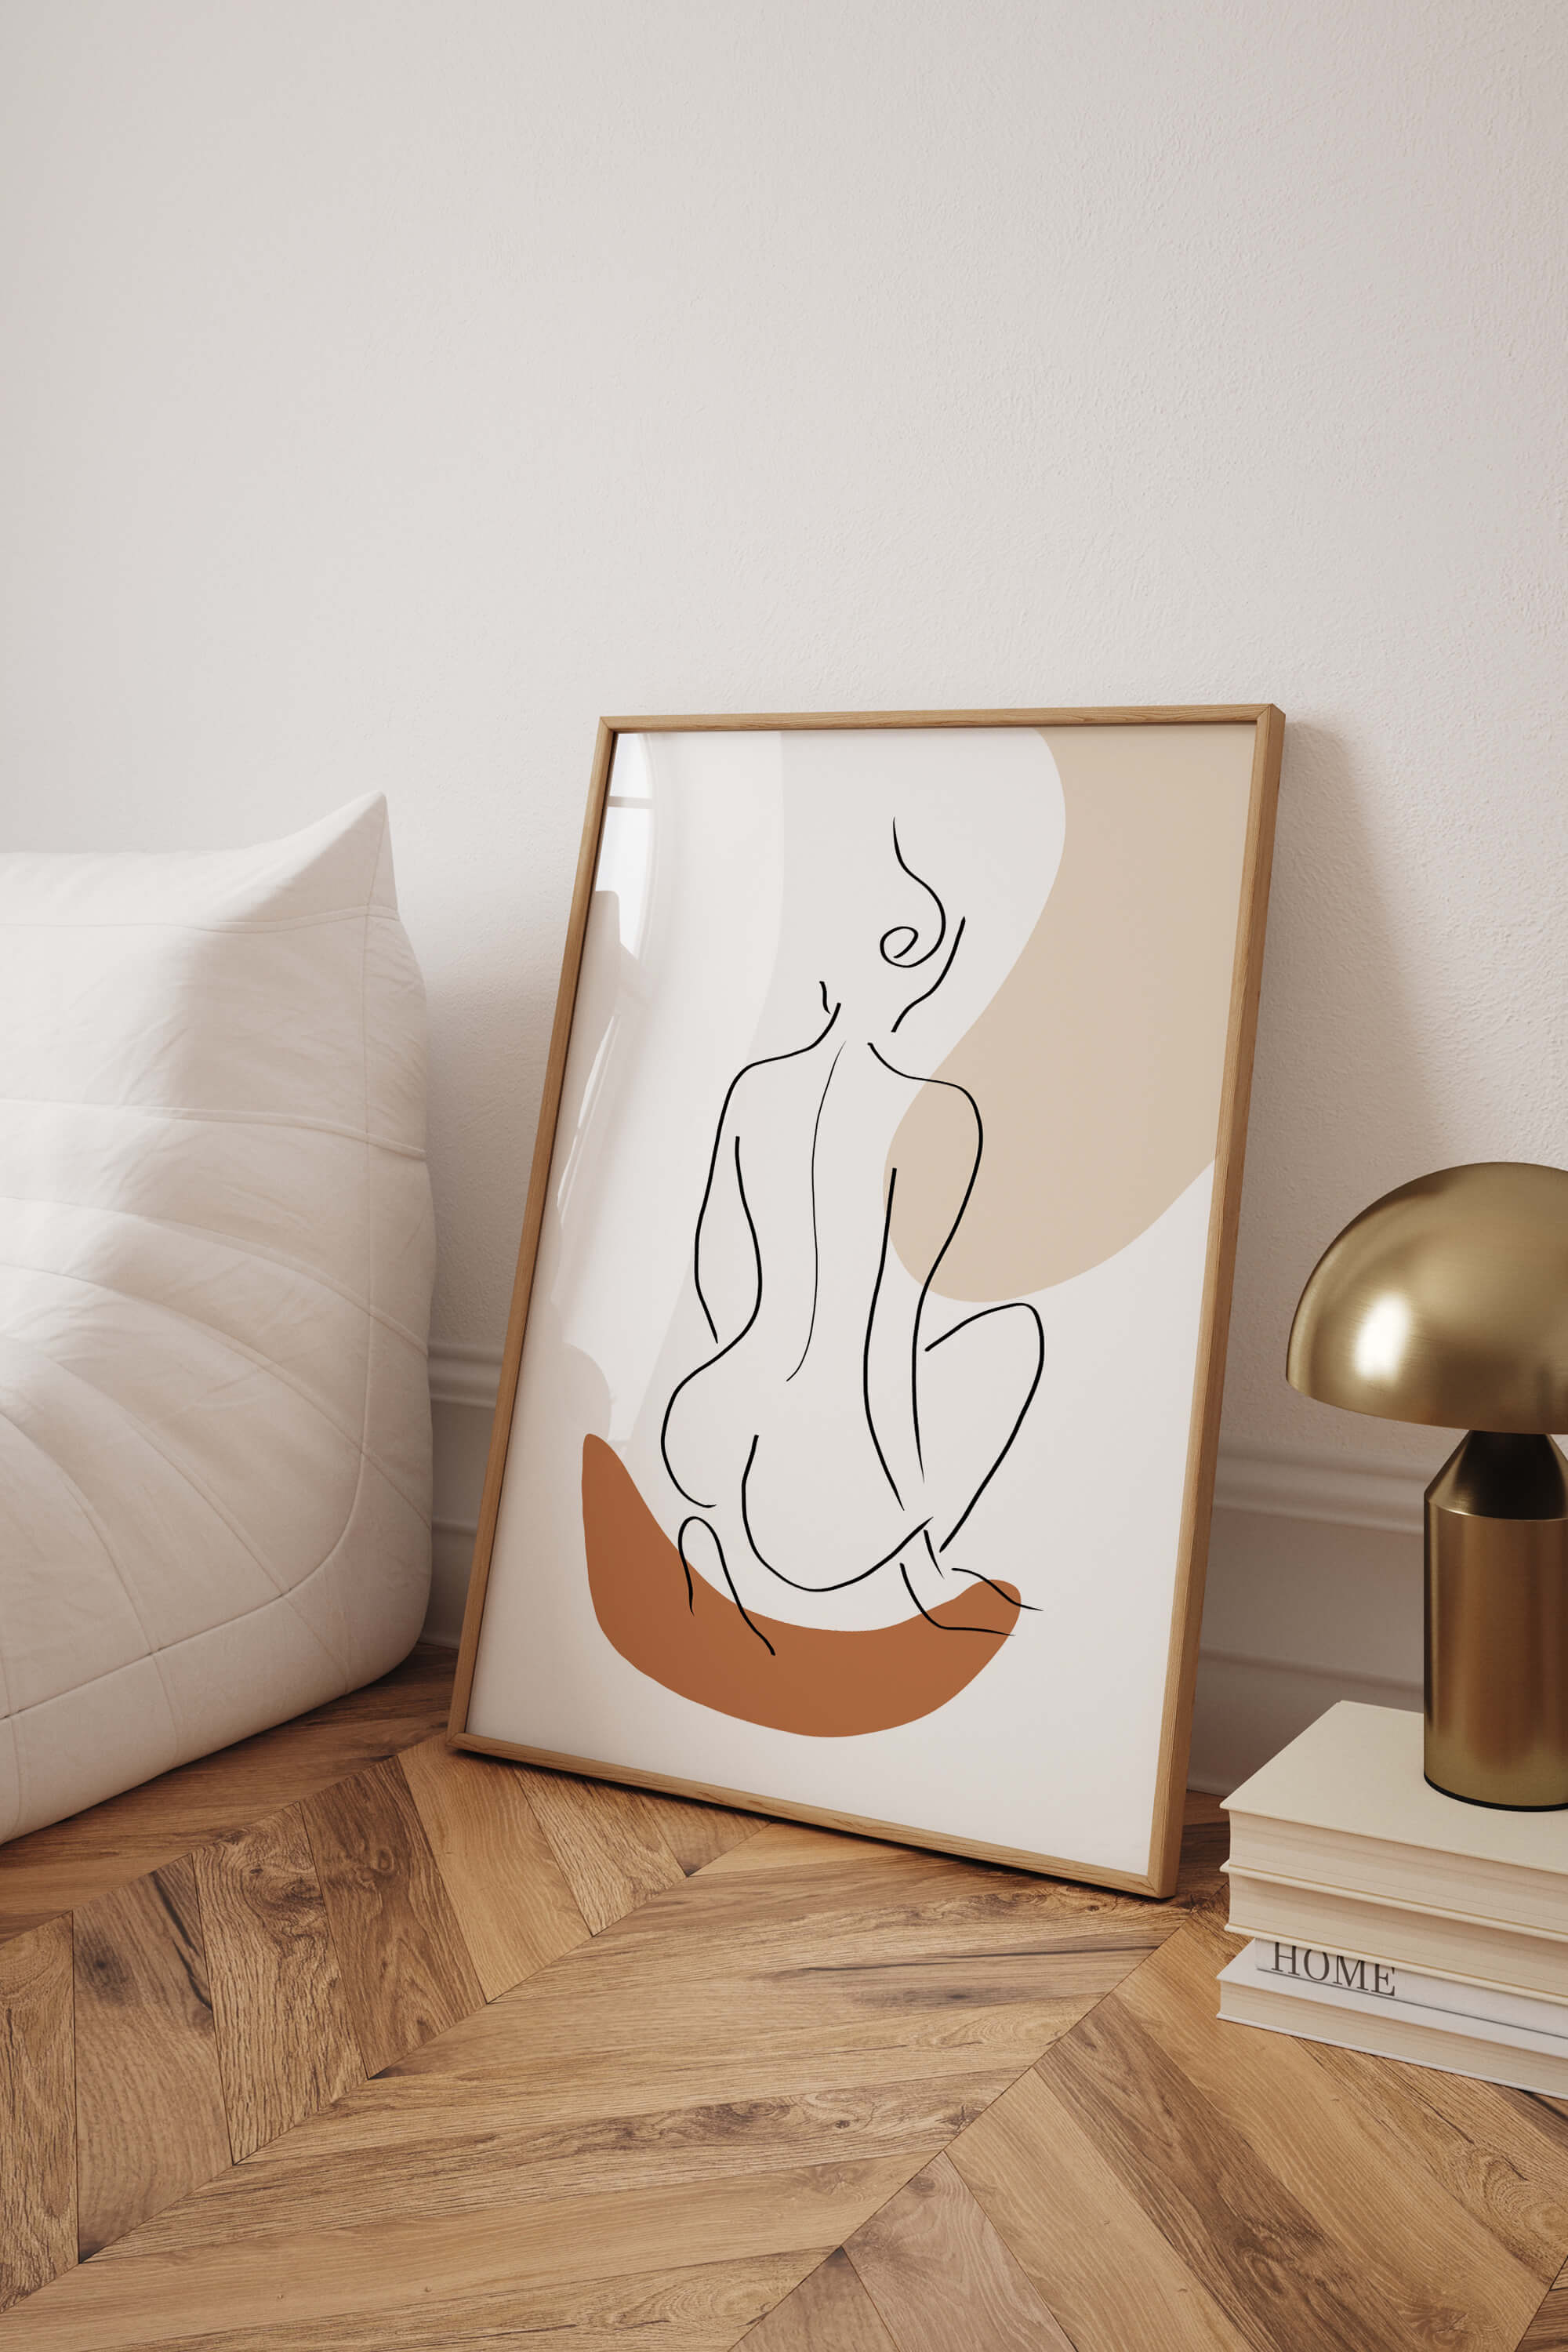 Artistic line art poster portraying the graceful allure of a woman, perfect for modern bedroom aesthetics.